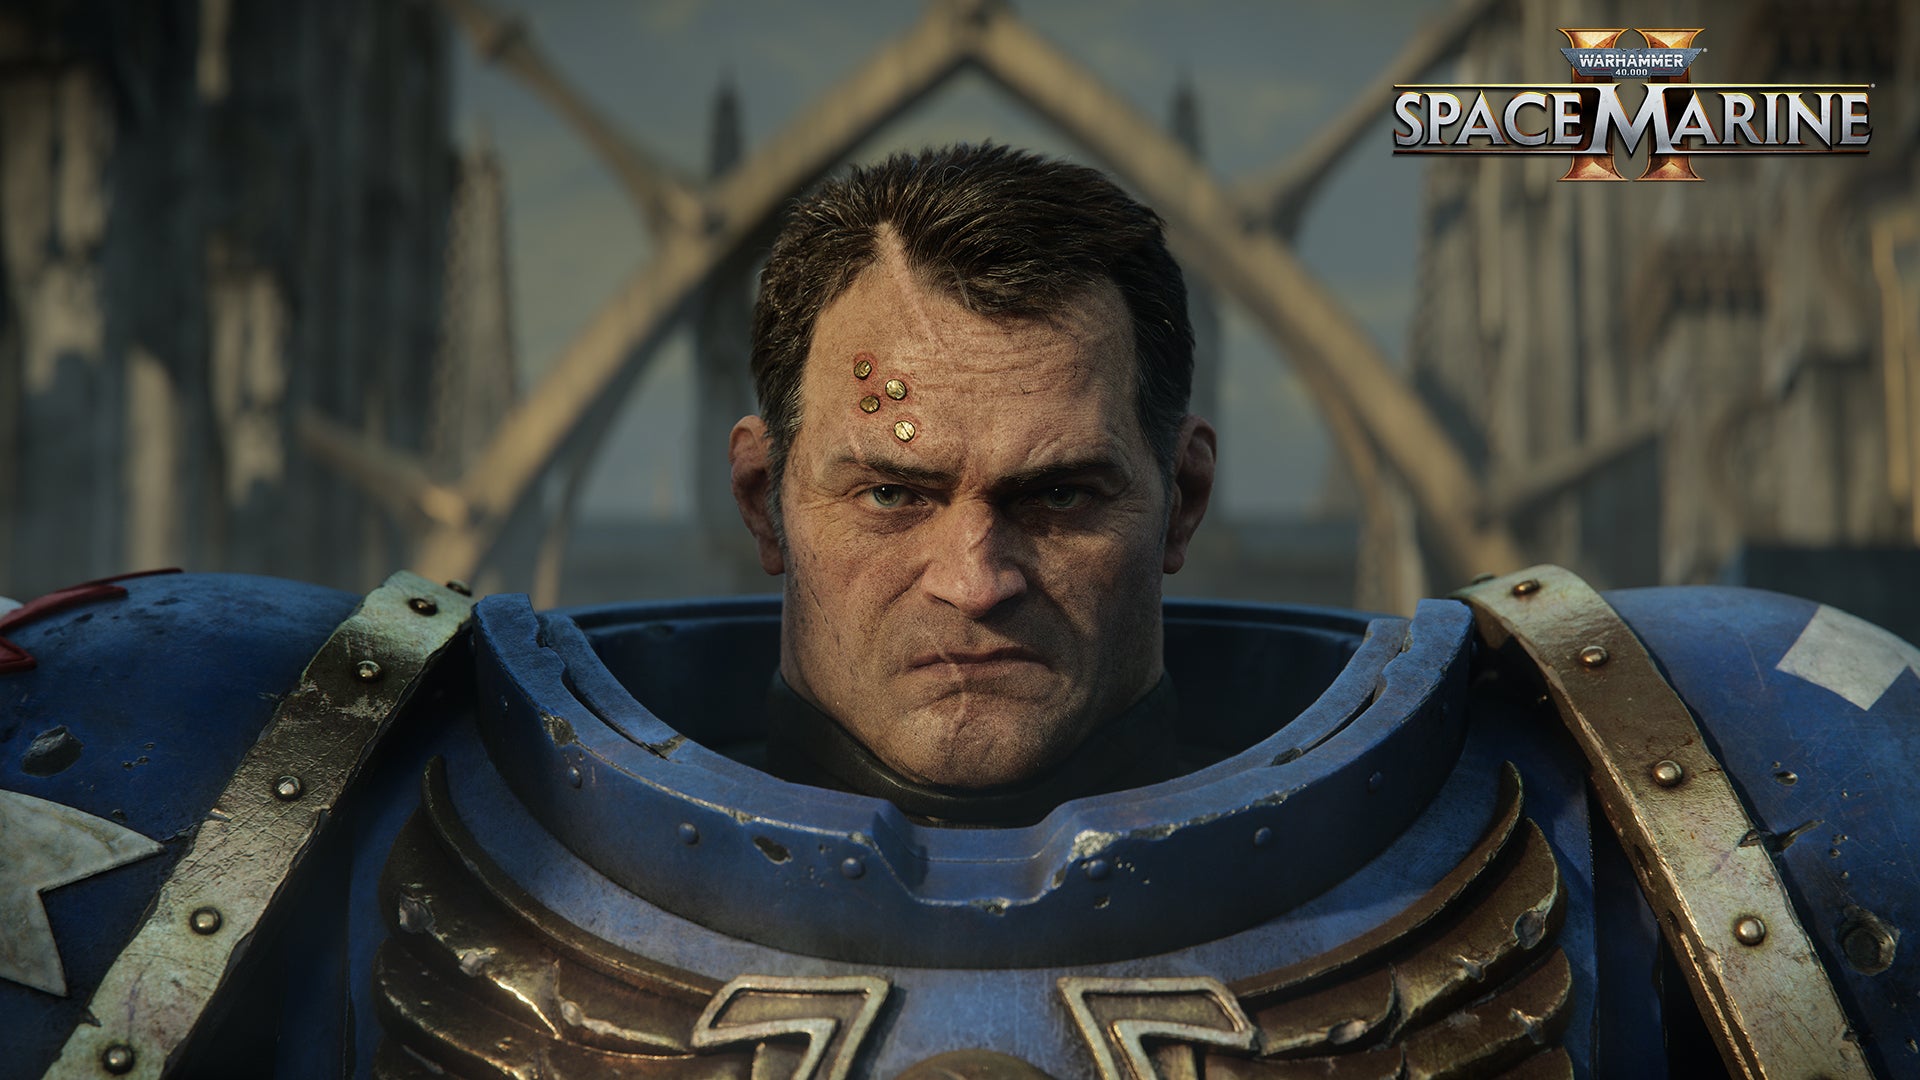 Image for Warhammer 40,000: Space Marine 2 announced for PC and consoles